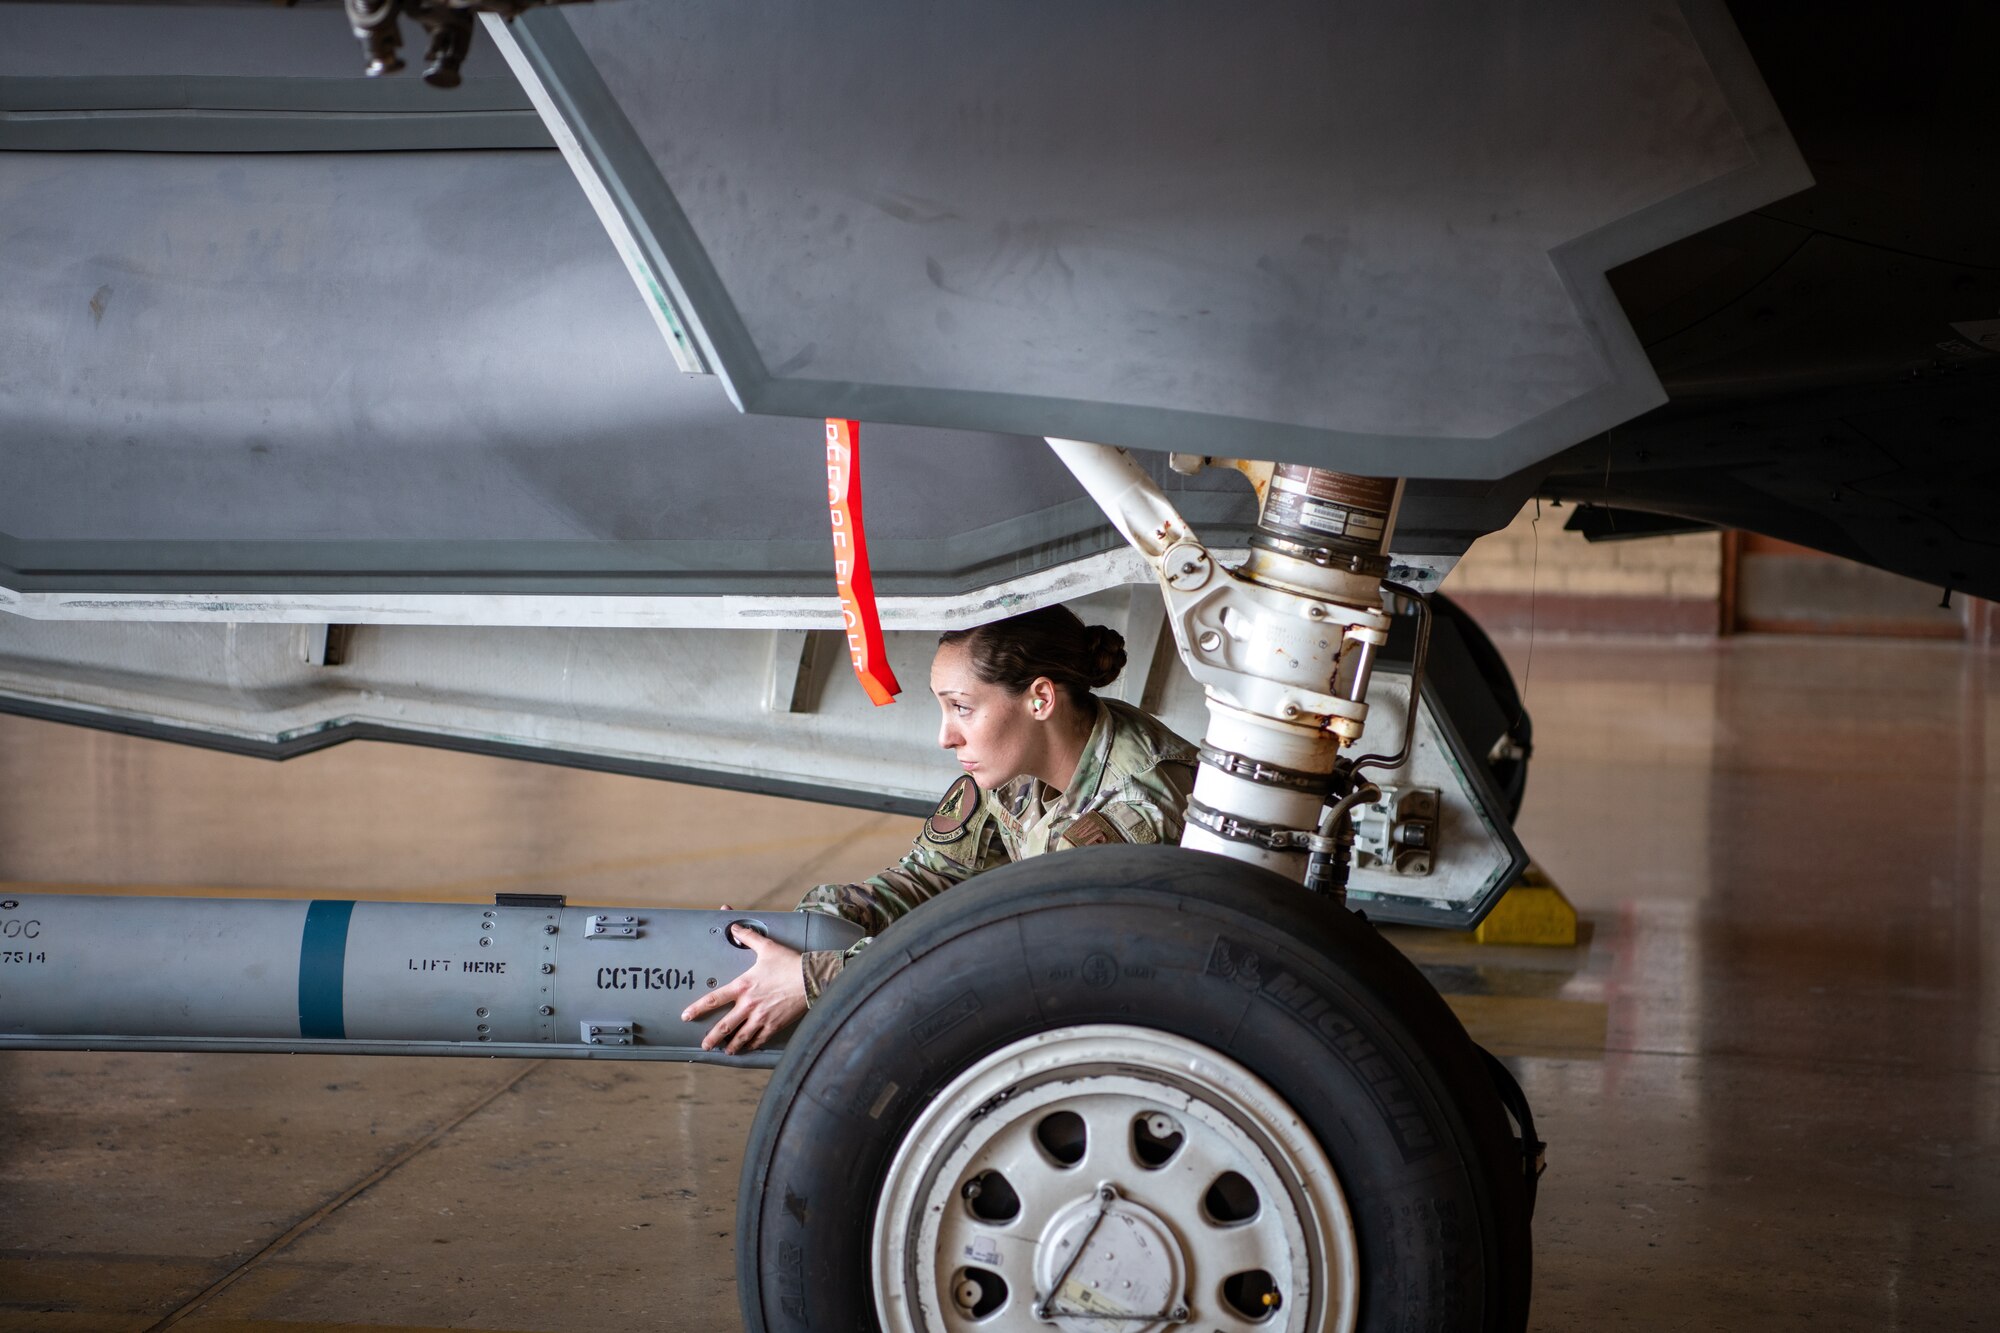 Senior Airman Abigail Halpert, 63rd Aircraft Maintenance Unit weapons load crew member, loads munitions onto an F-35A Lightning II during the Women of Weapons Load Exhibition March 11, 2022, at Luke Air Force Base, Arizona. The event was held in celebration of Women’s History Month to exemplify a culture of diversity and inclusion across the 56th Maintenance Group. (U.S. Air Force photo by Senior Airman Phyllis Jimenez)